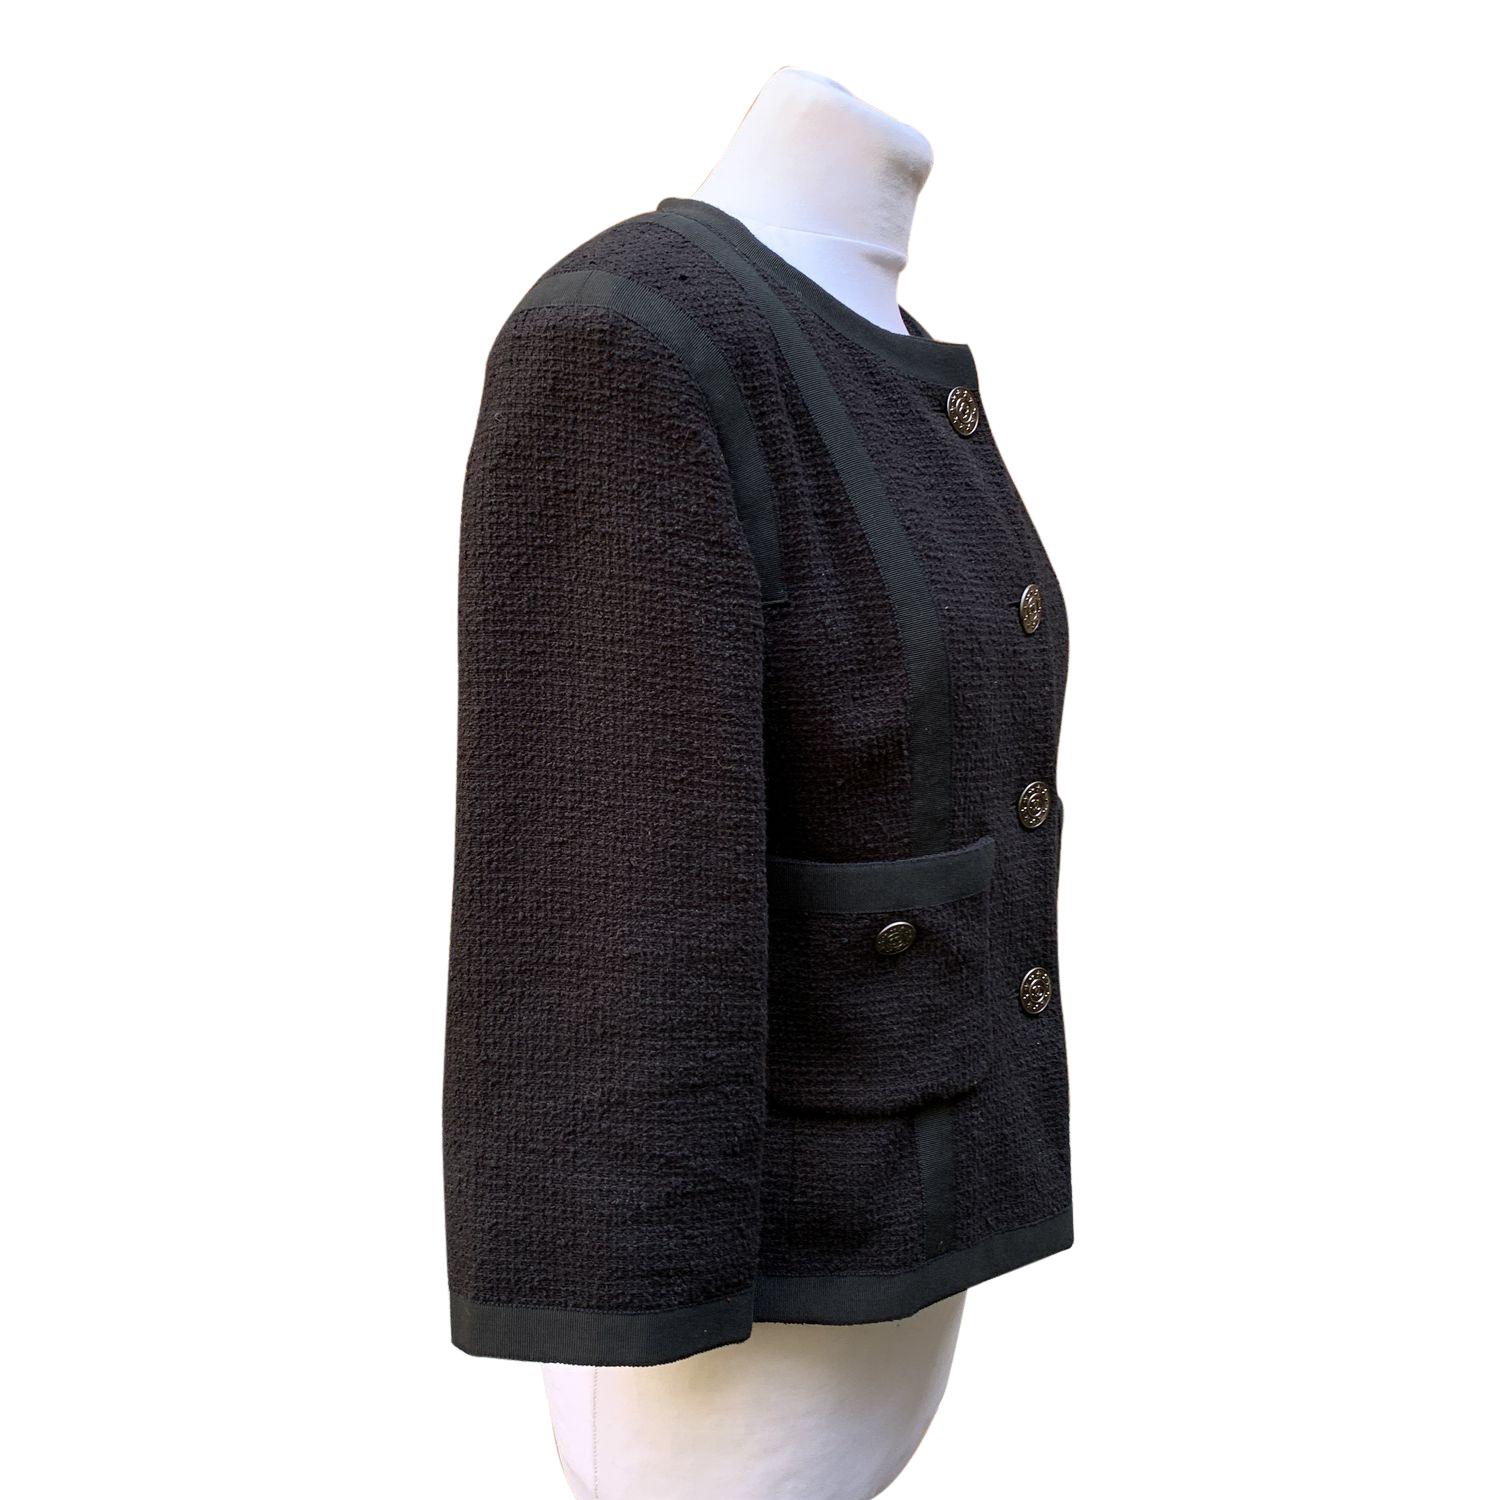 Chanel 2013 Black Cotton Tweed 3/4 Length Jacket Size 36 FR In Excellent Condition For Sale In Rome, Rome